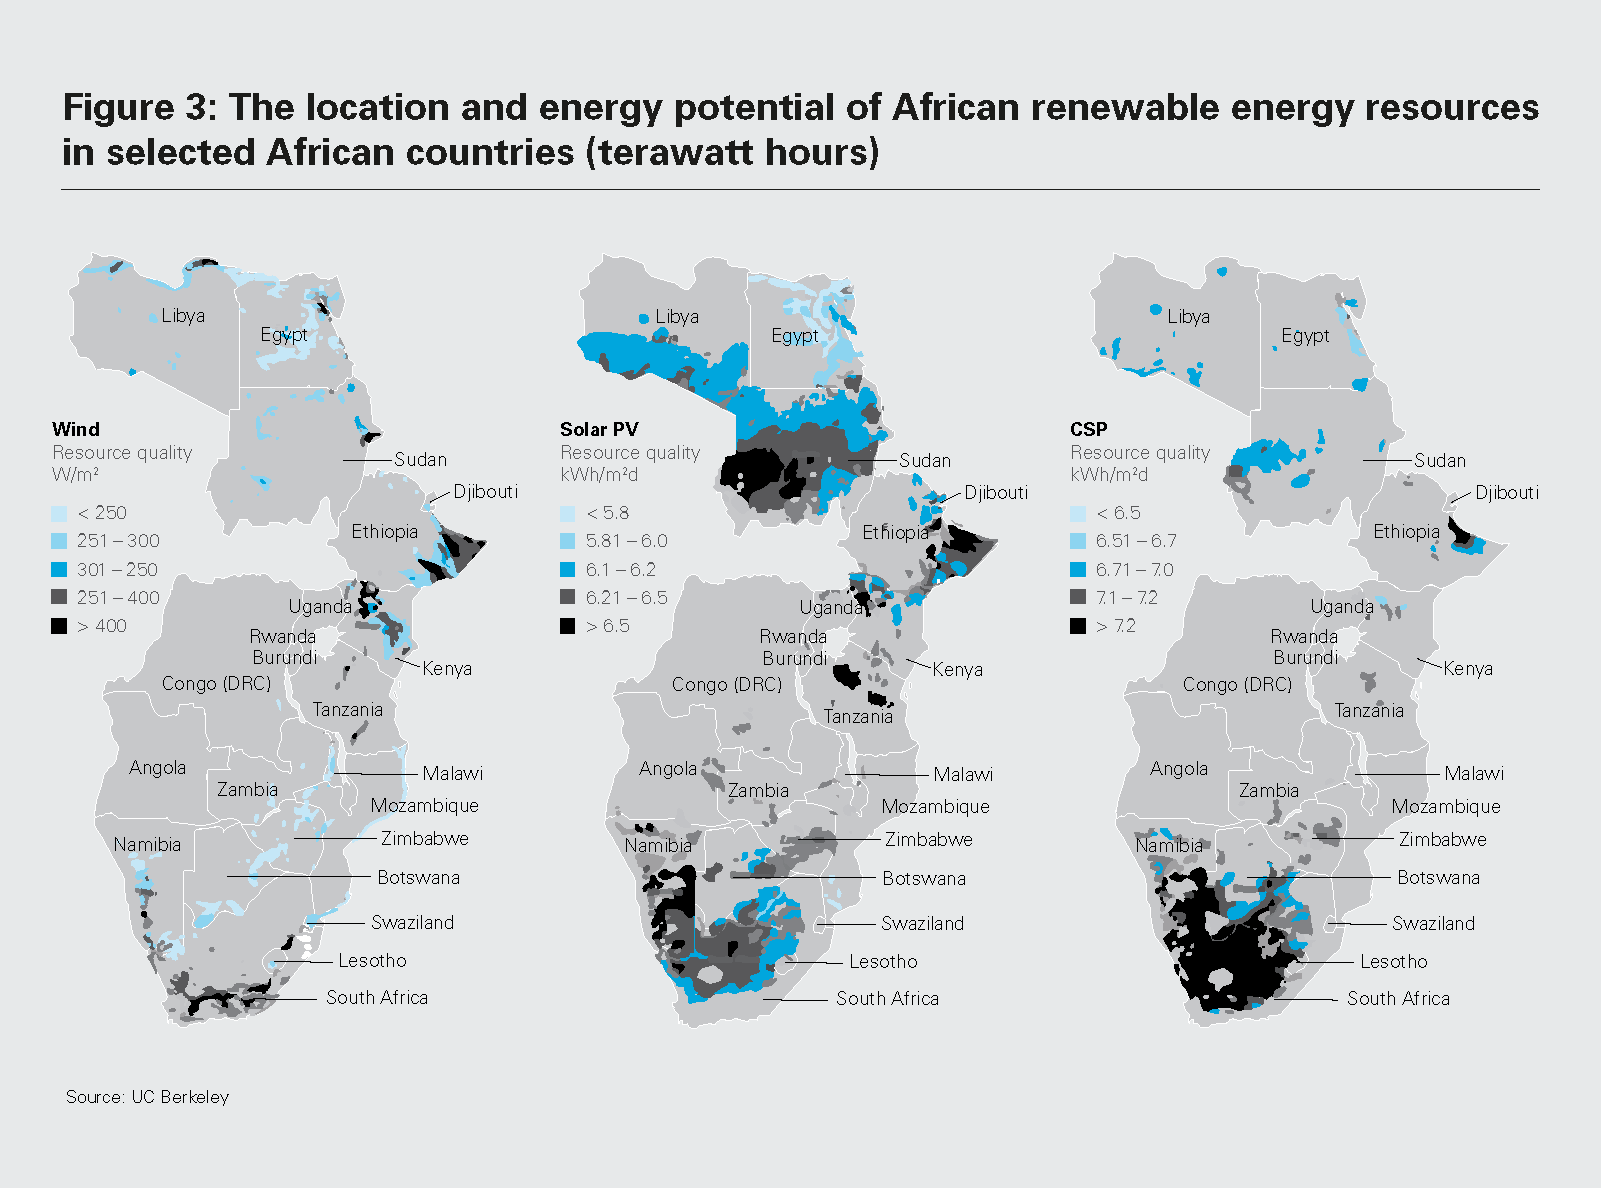 Figure 3: The location and energy potential of African renewable energy resources in selected African countries (terawatt hours)